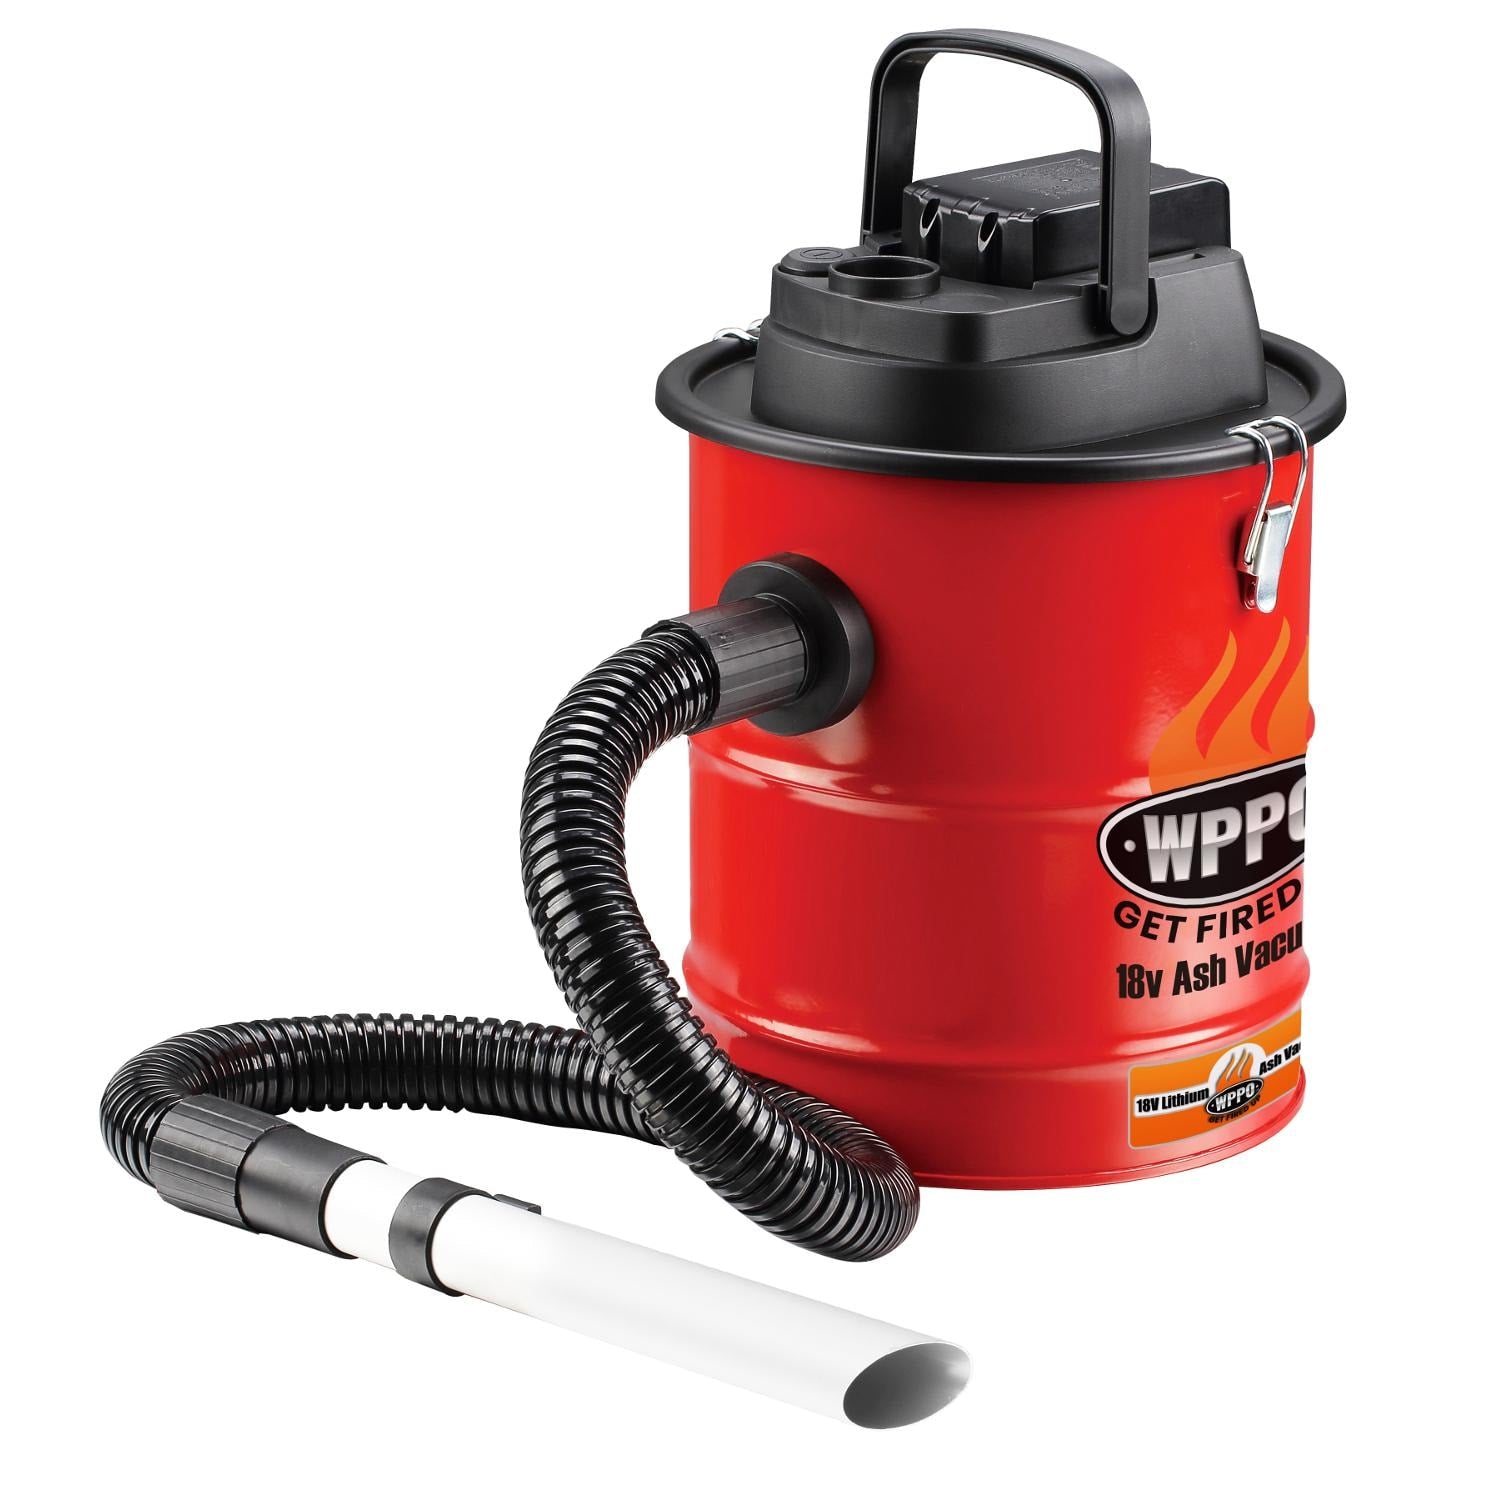 Main image of the WPPO™ 18V Rechargeable Ash Vacuum w/ Attachments (SKU: WKAV-01) with a solid white background